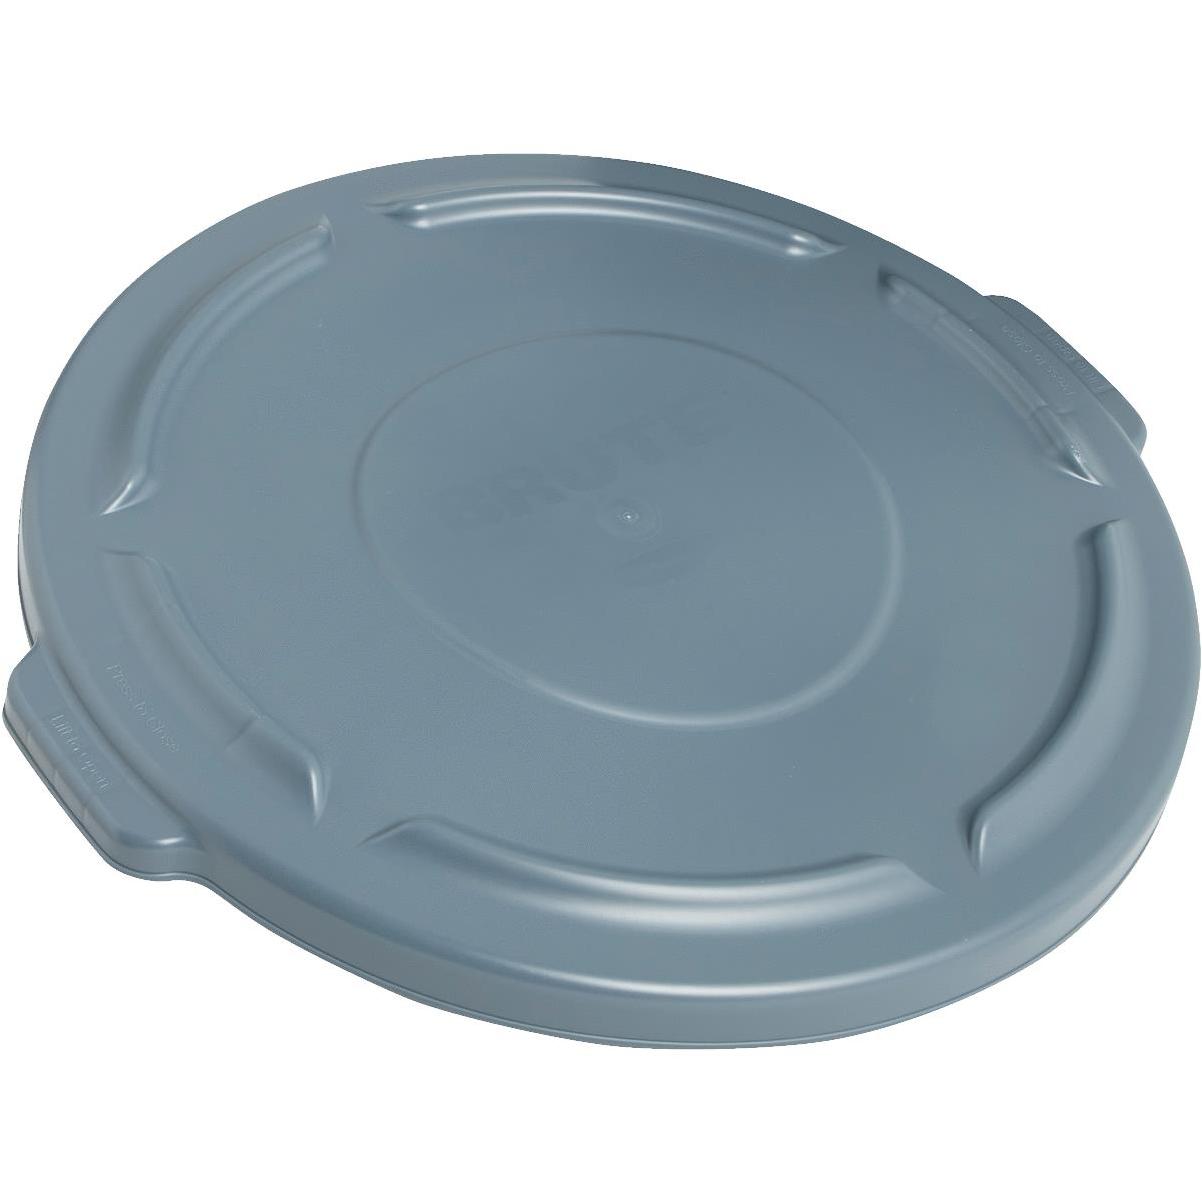 Rubbermaid Commercial Brute Gray Trash Can Lid for 32 Gal. Trash